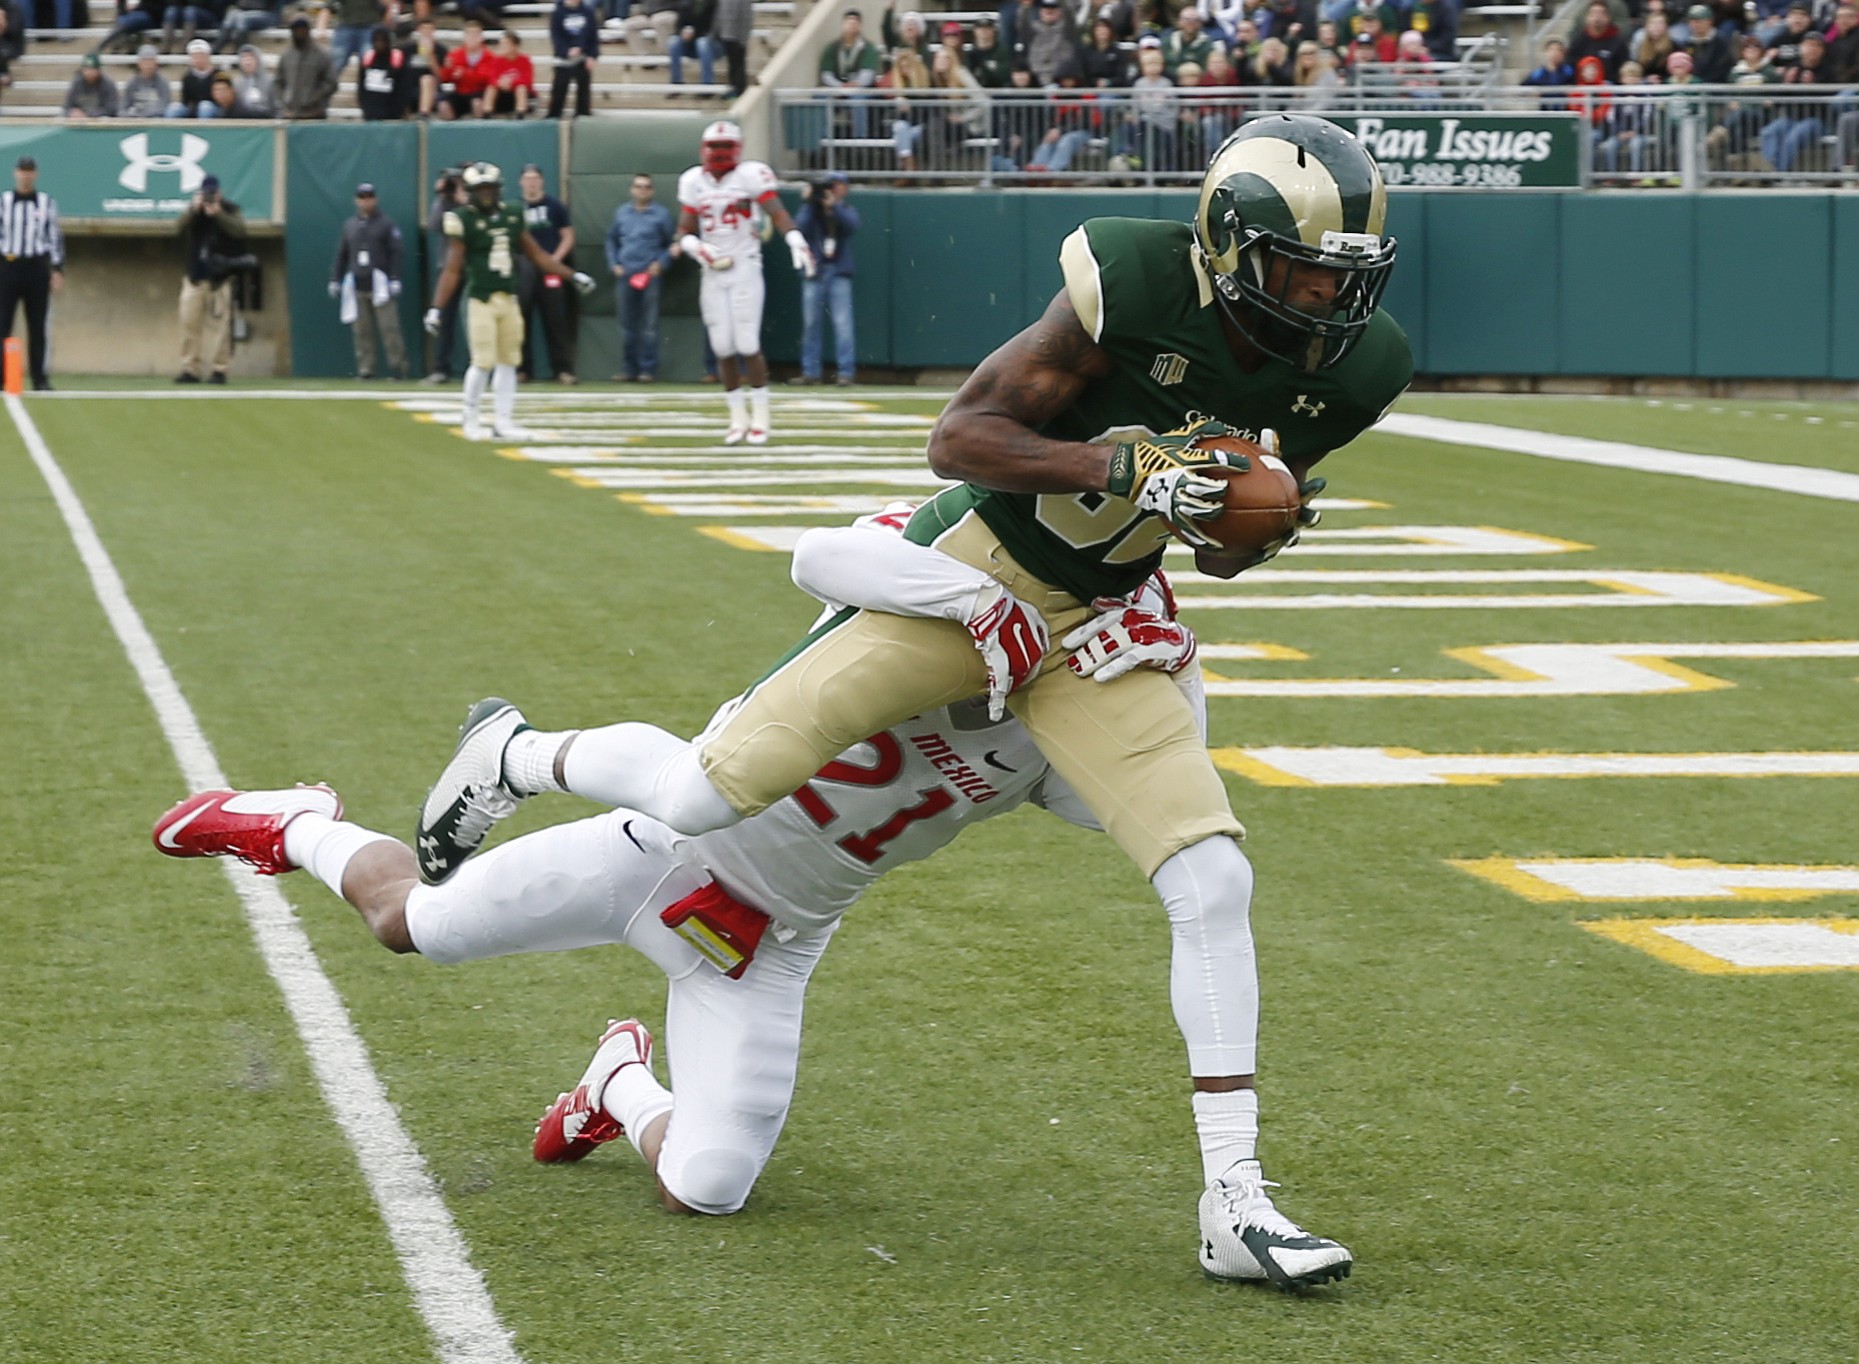 Colorado State wide receiver Rashard Higgins, front, drags New Mexico defensive back Donnie Duncan into the end zone for a touchdown after catching a pass from Garrett Grayson in the third quarter of Colorado State's 58-20 victory in Fort Collins, Colo., on Saturday, Nov. 22, 2014.